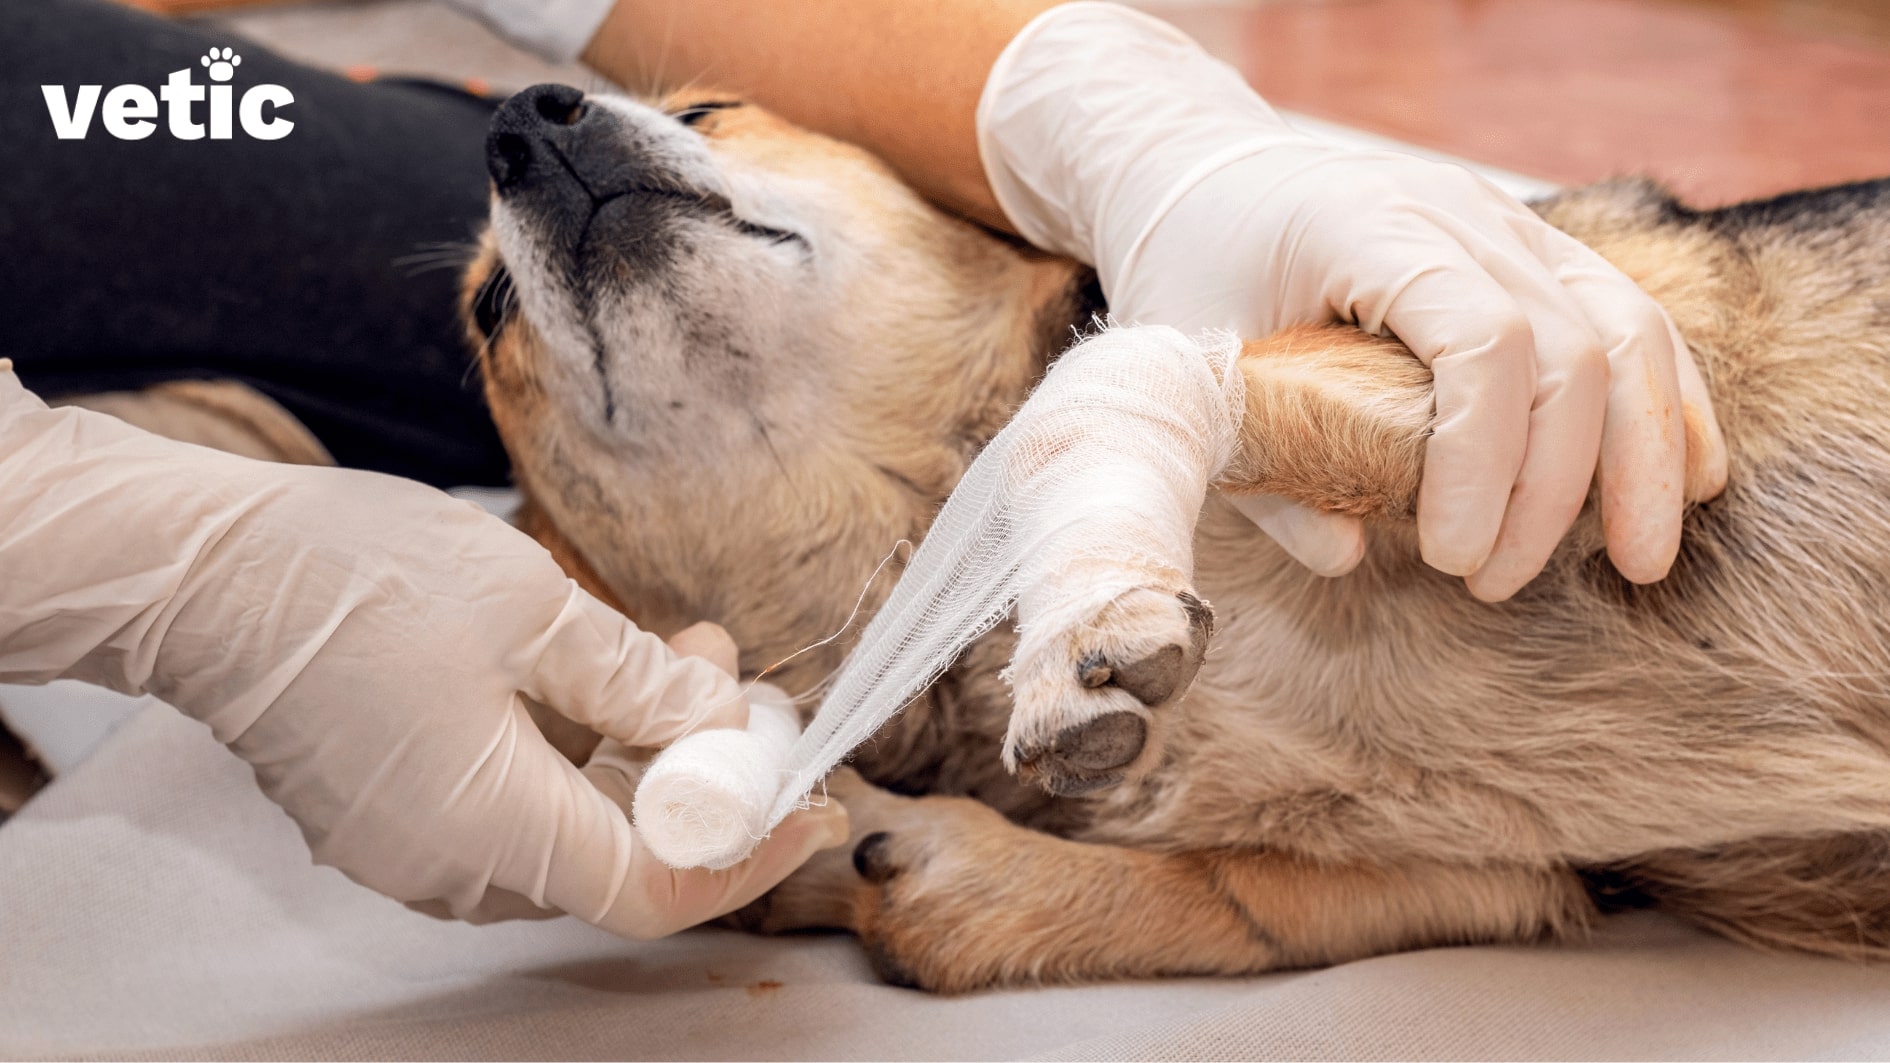 Dog's forehand being bandaged by someone wearing gloves. Muscle and joint injuries are common in dogs living alone.